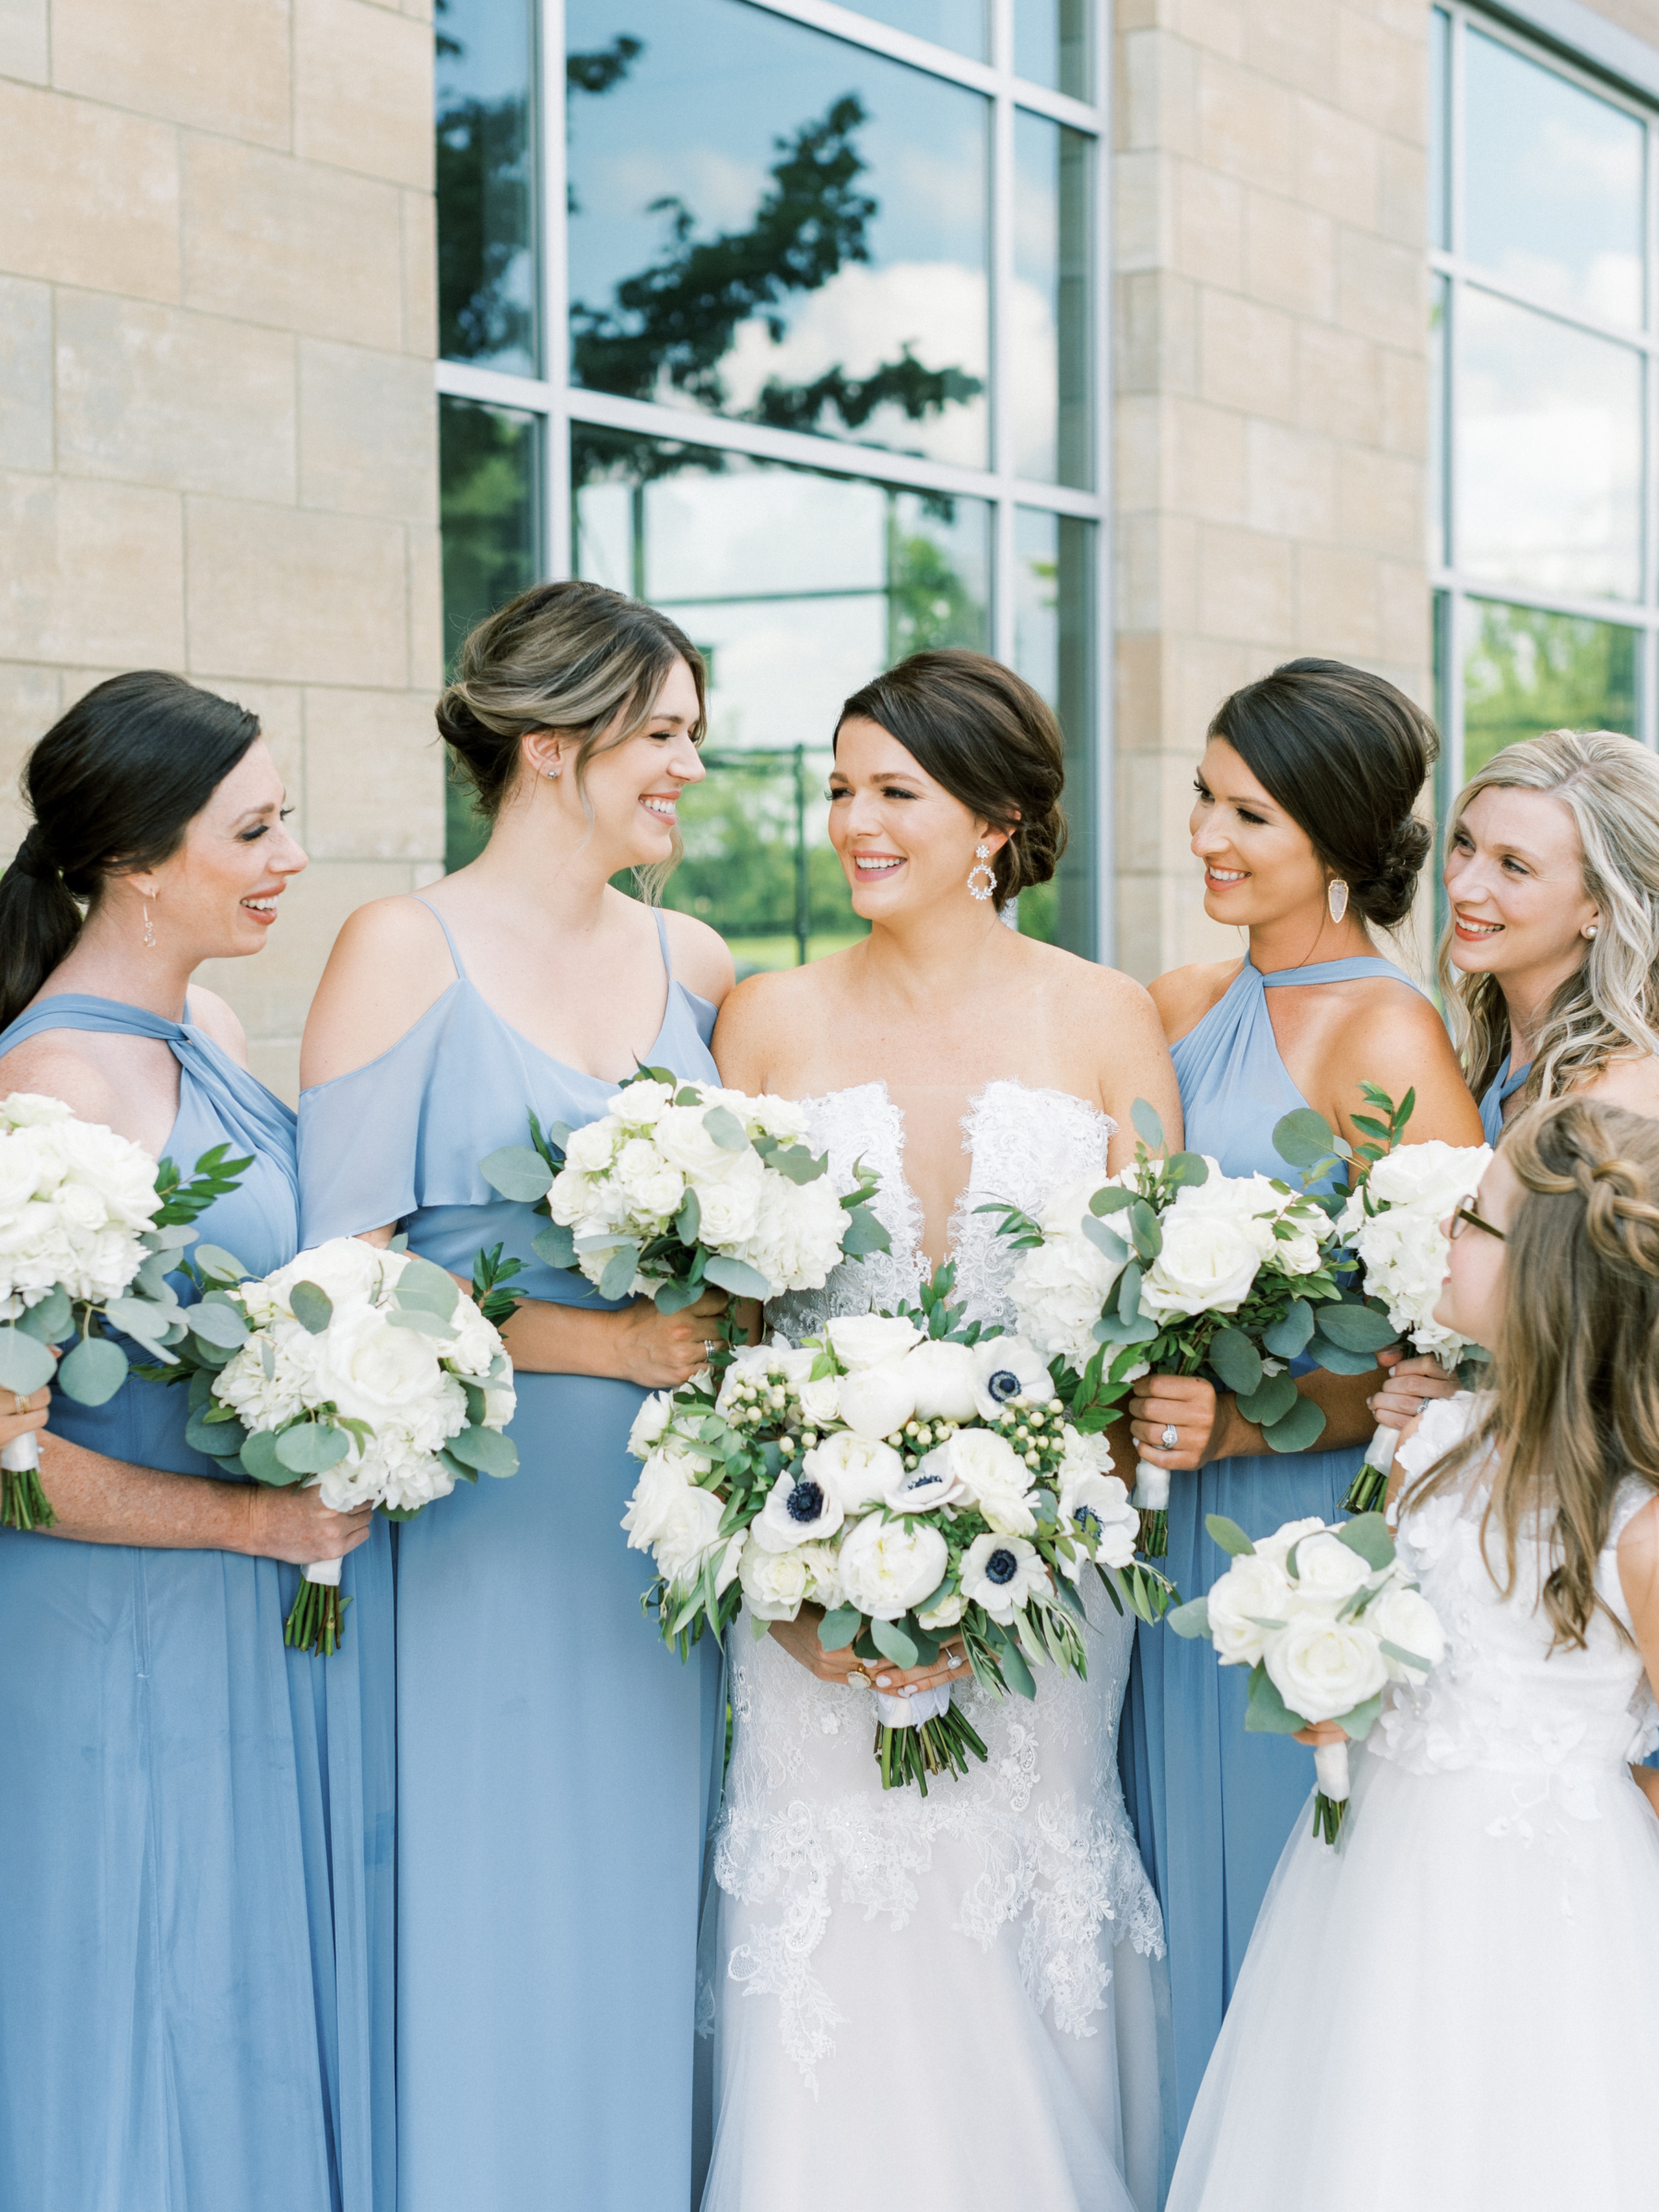 French blue bridesmaids dresses